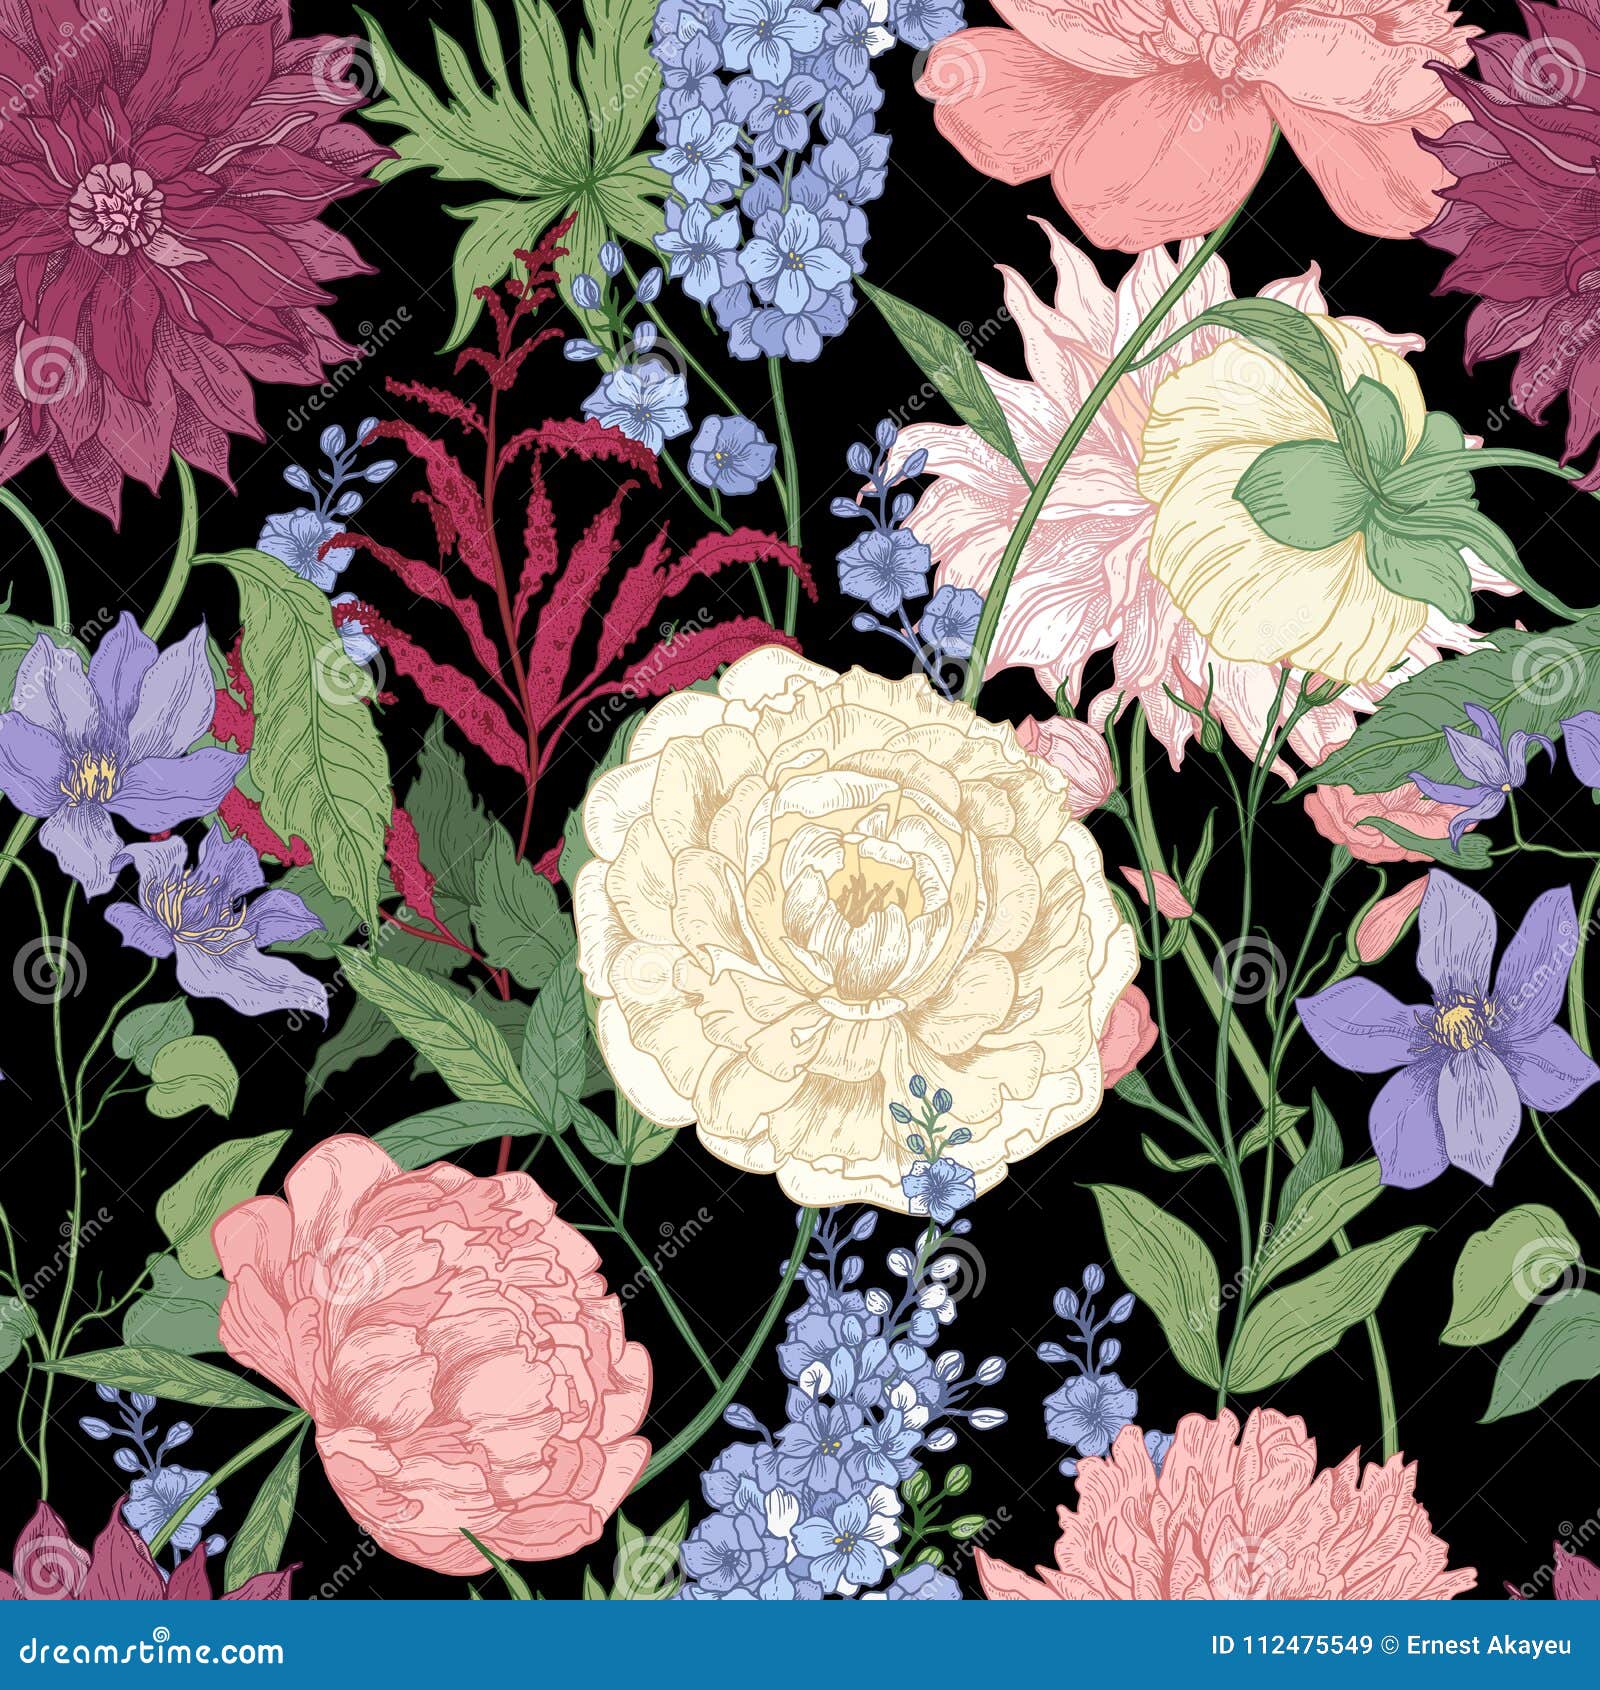 floral seamless pattern with elegant flowers and flowering plants used in floristry hand drawn on black background